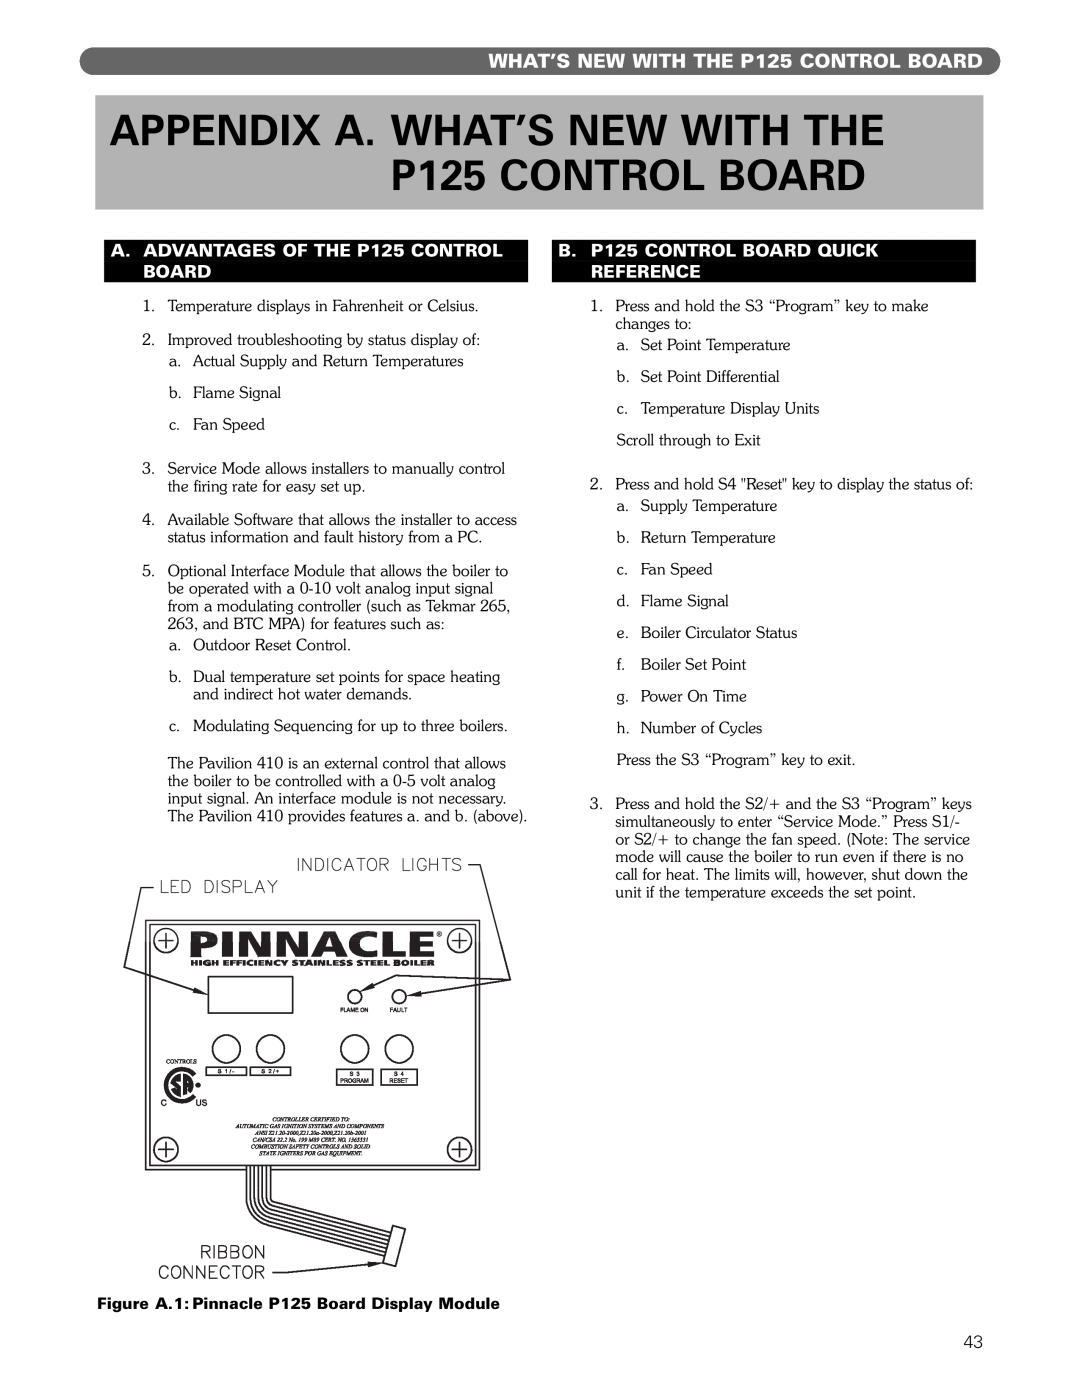 PB Heat Gas Boiler manual WHAT’S NEW WITH THE P125 CONTROL BOARD, A.ADVANTAGES OF THE P125 CONTROL BOARD 